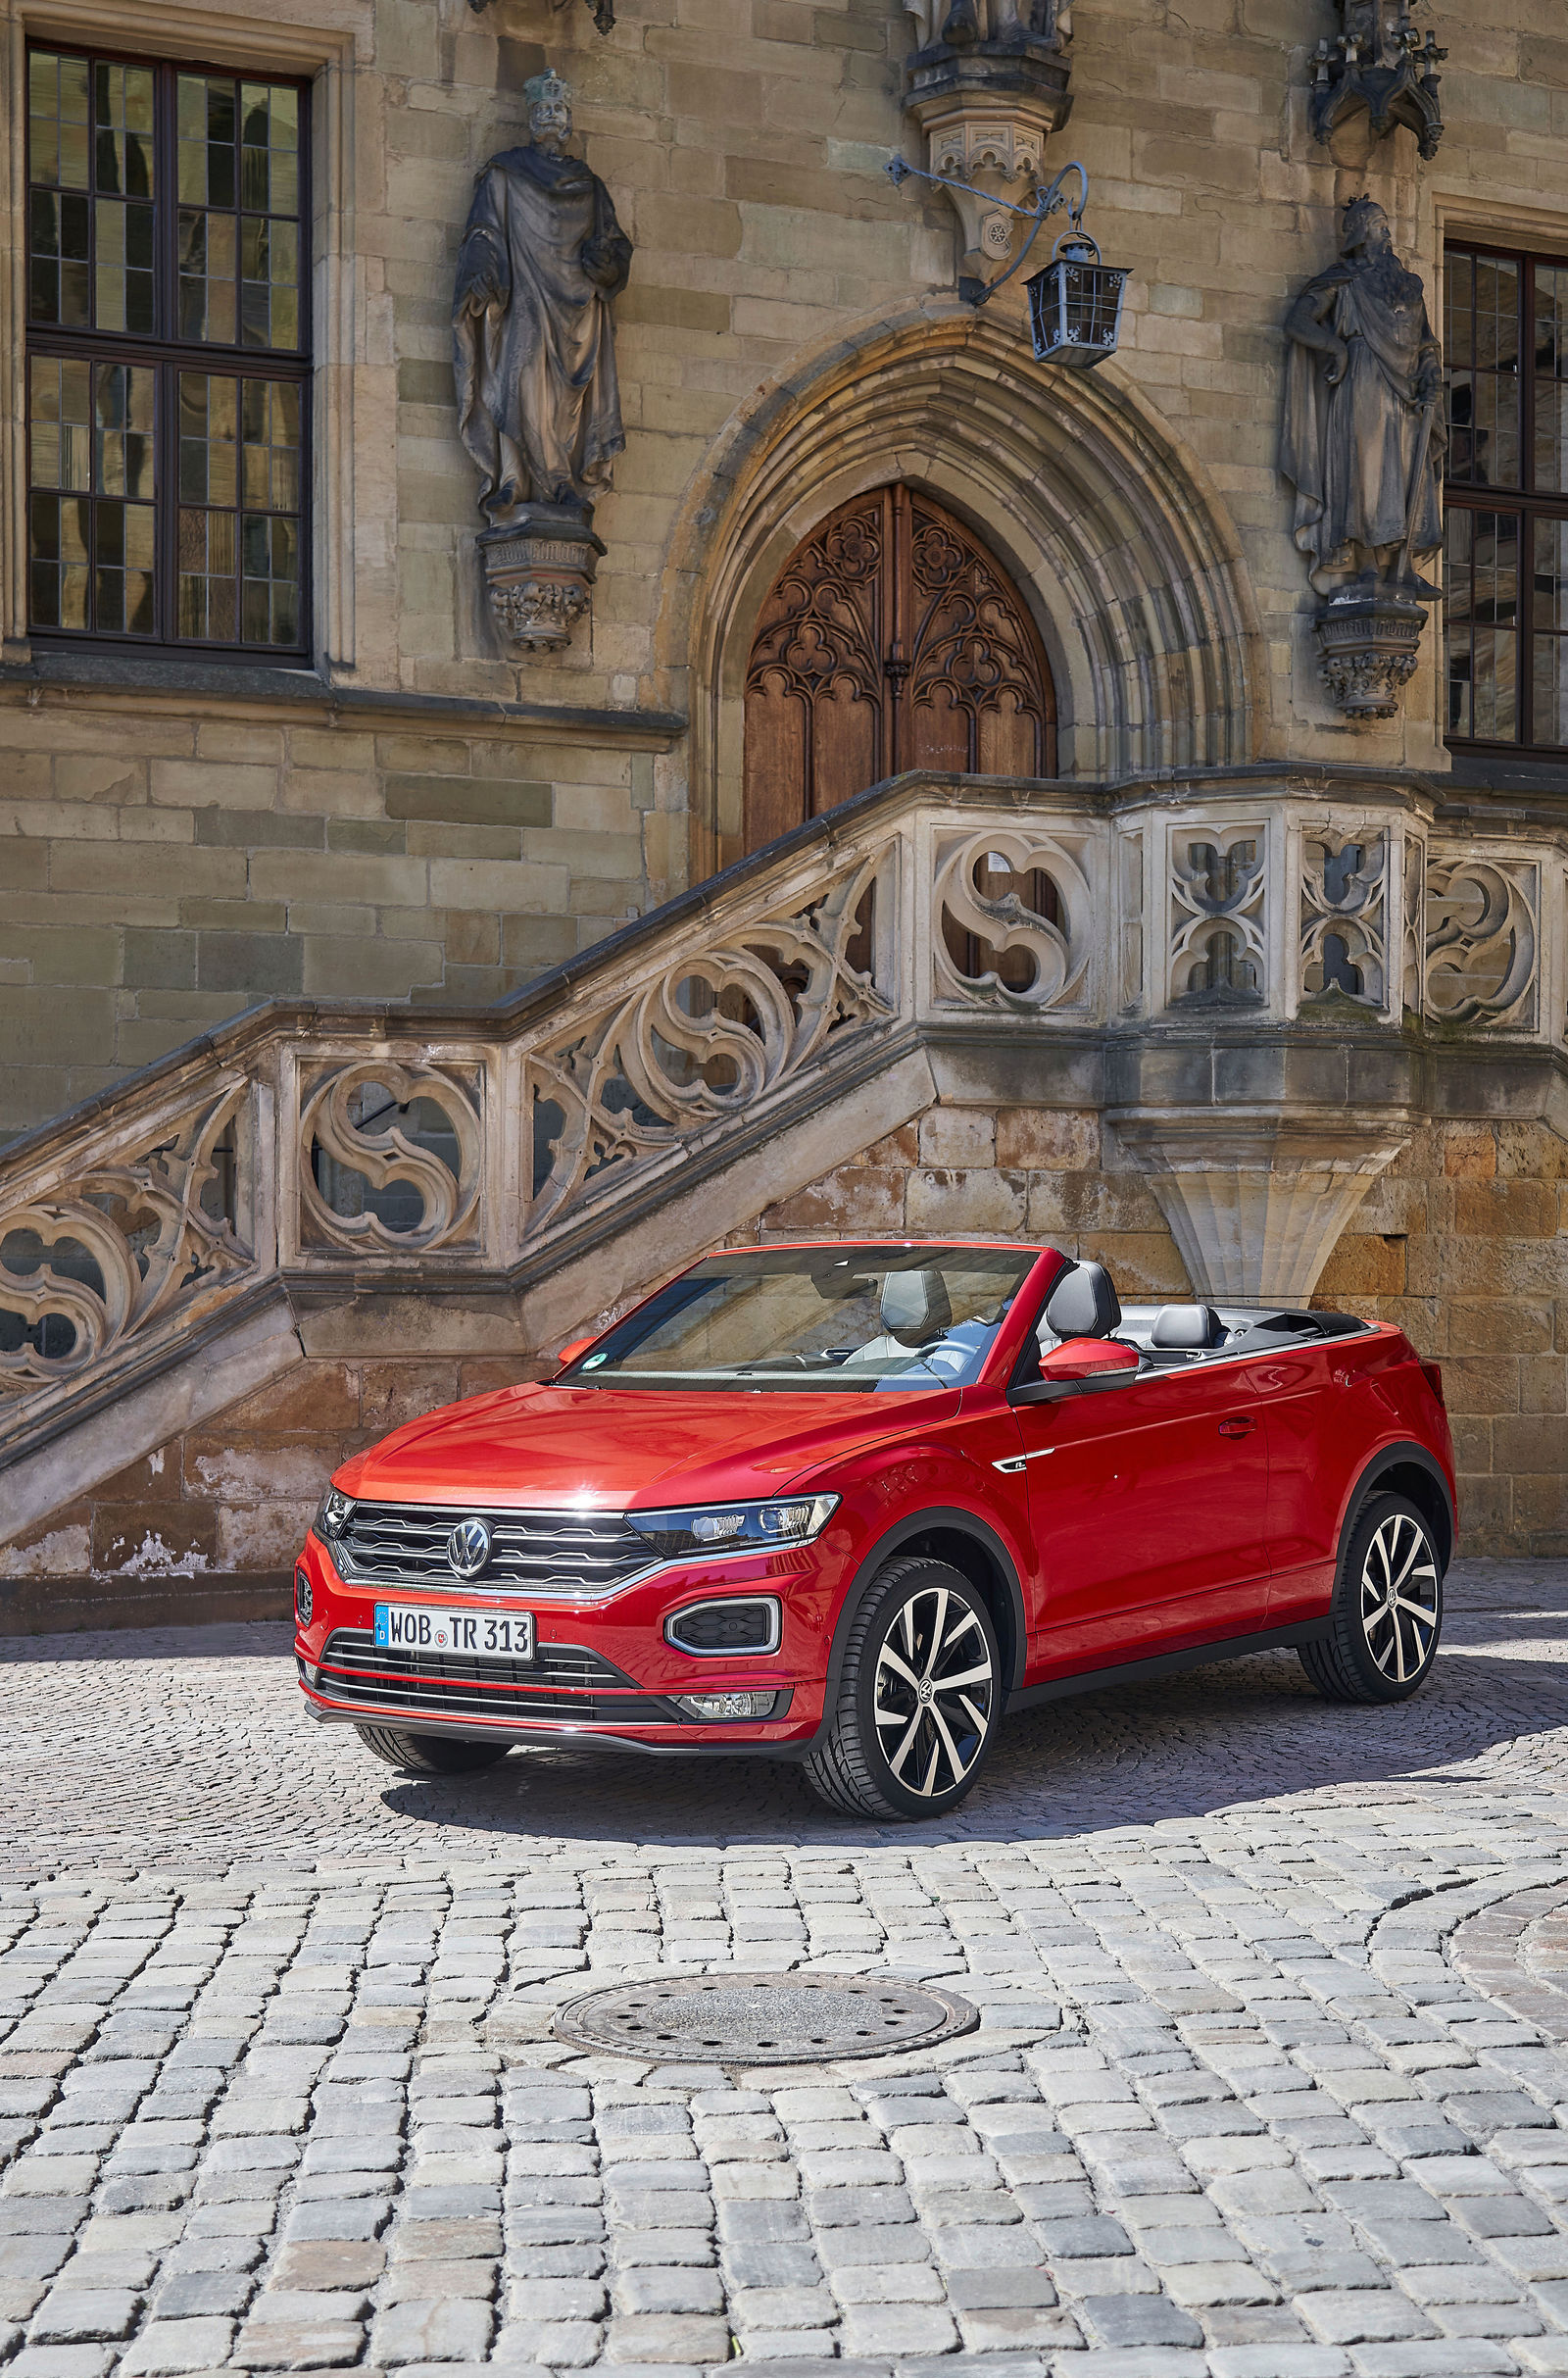 Story: "New signing from Osnabrück – the T-Roc Cabriolet"